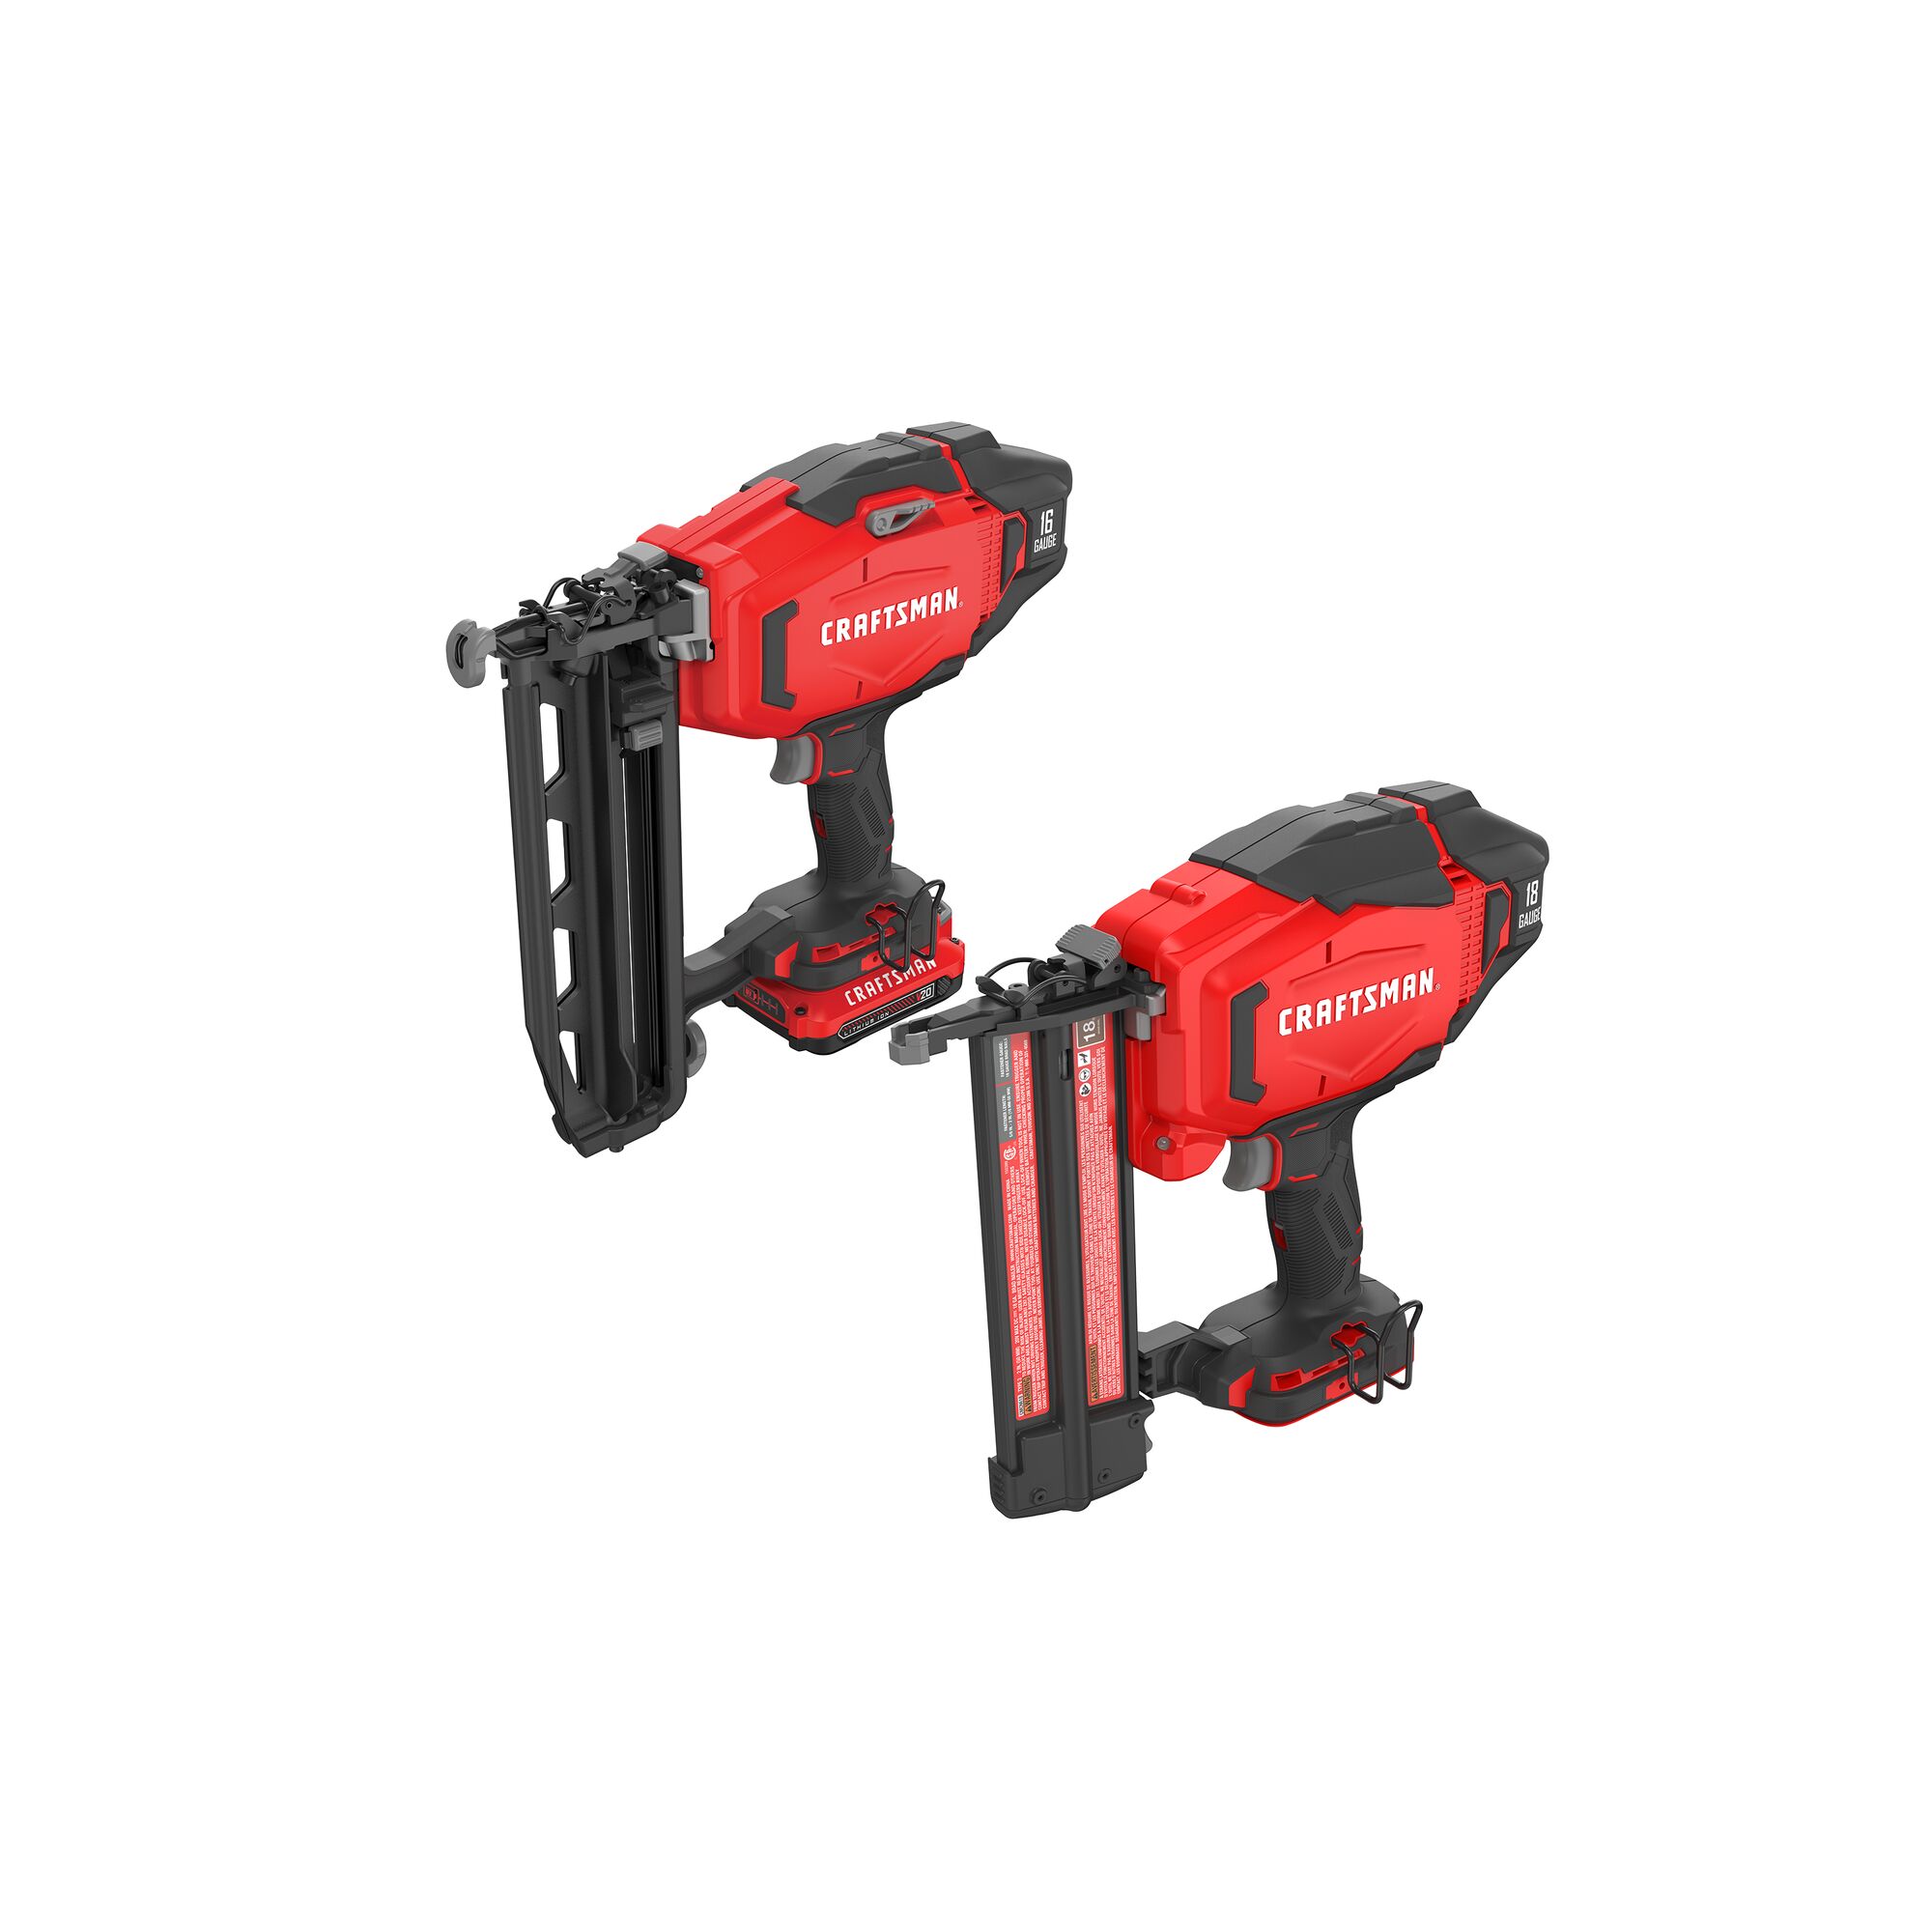 View of CRAFTSMAN Nailer: Brad family of products